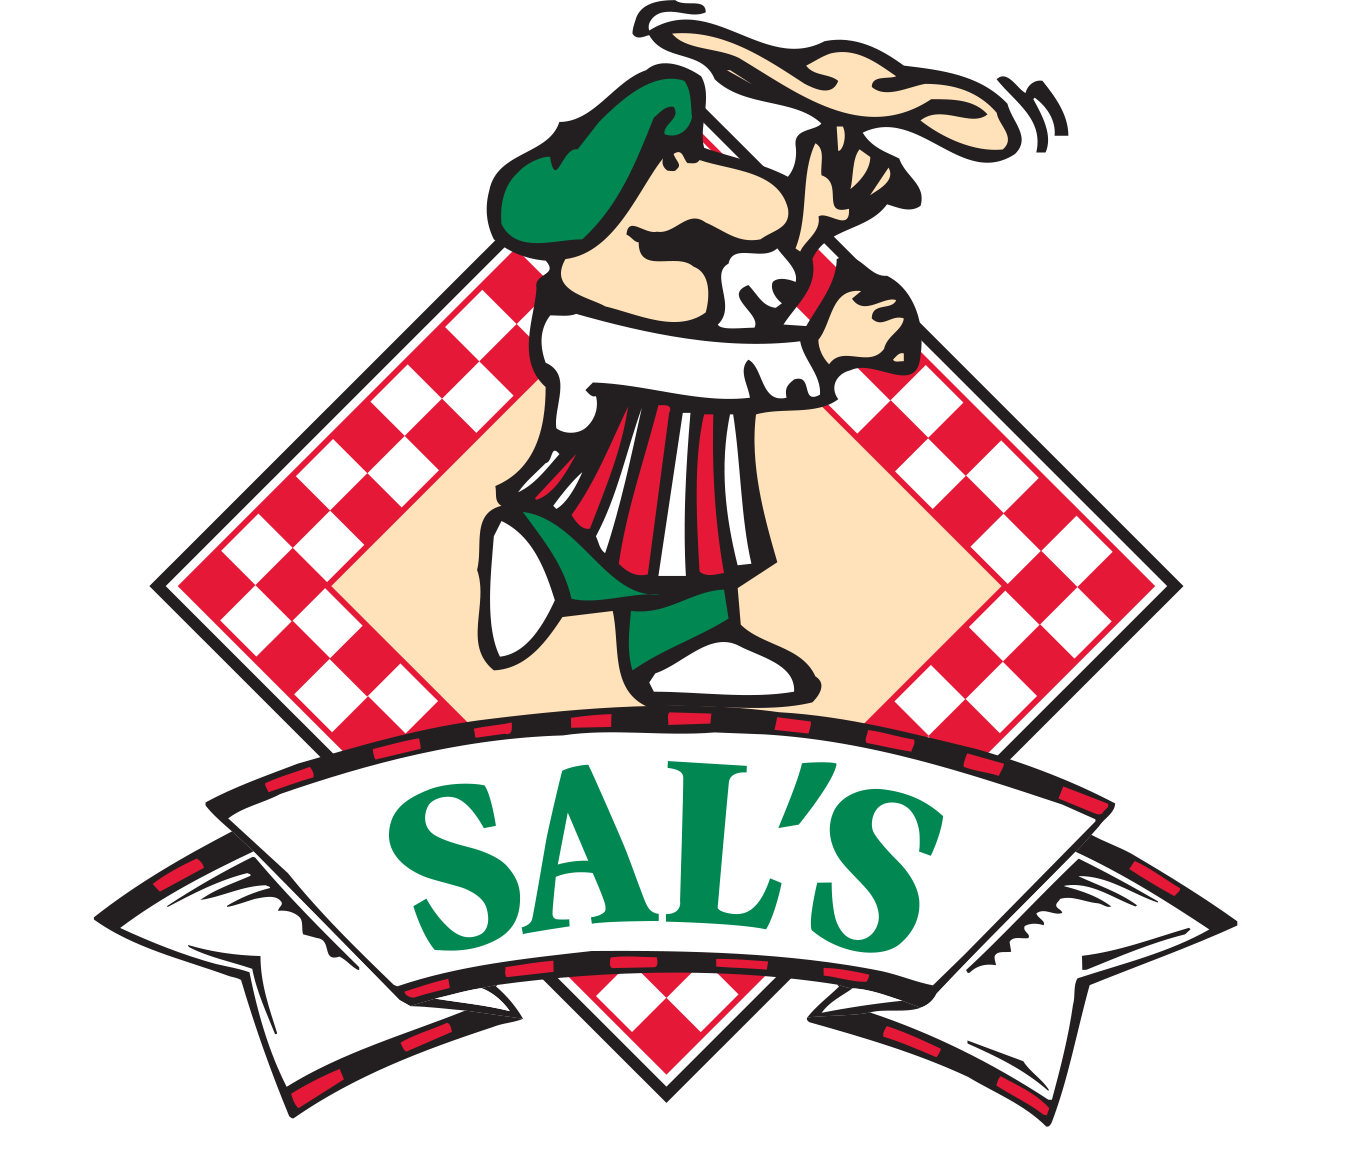 Sal's Pizza & Subs